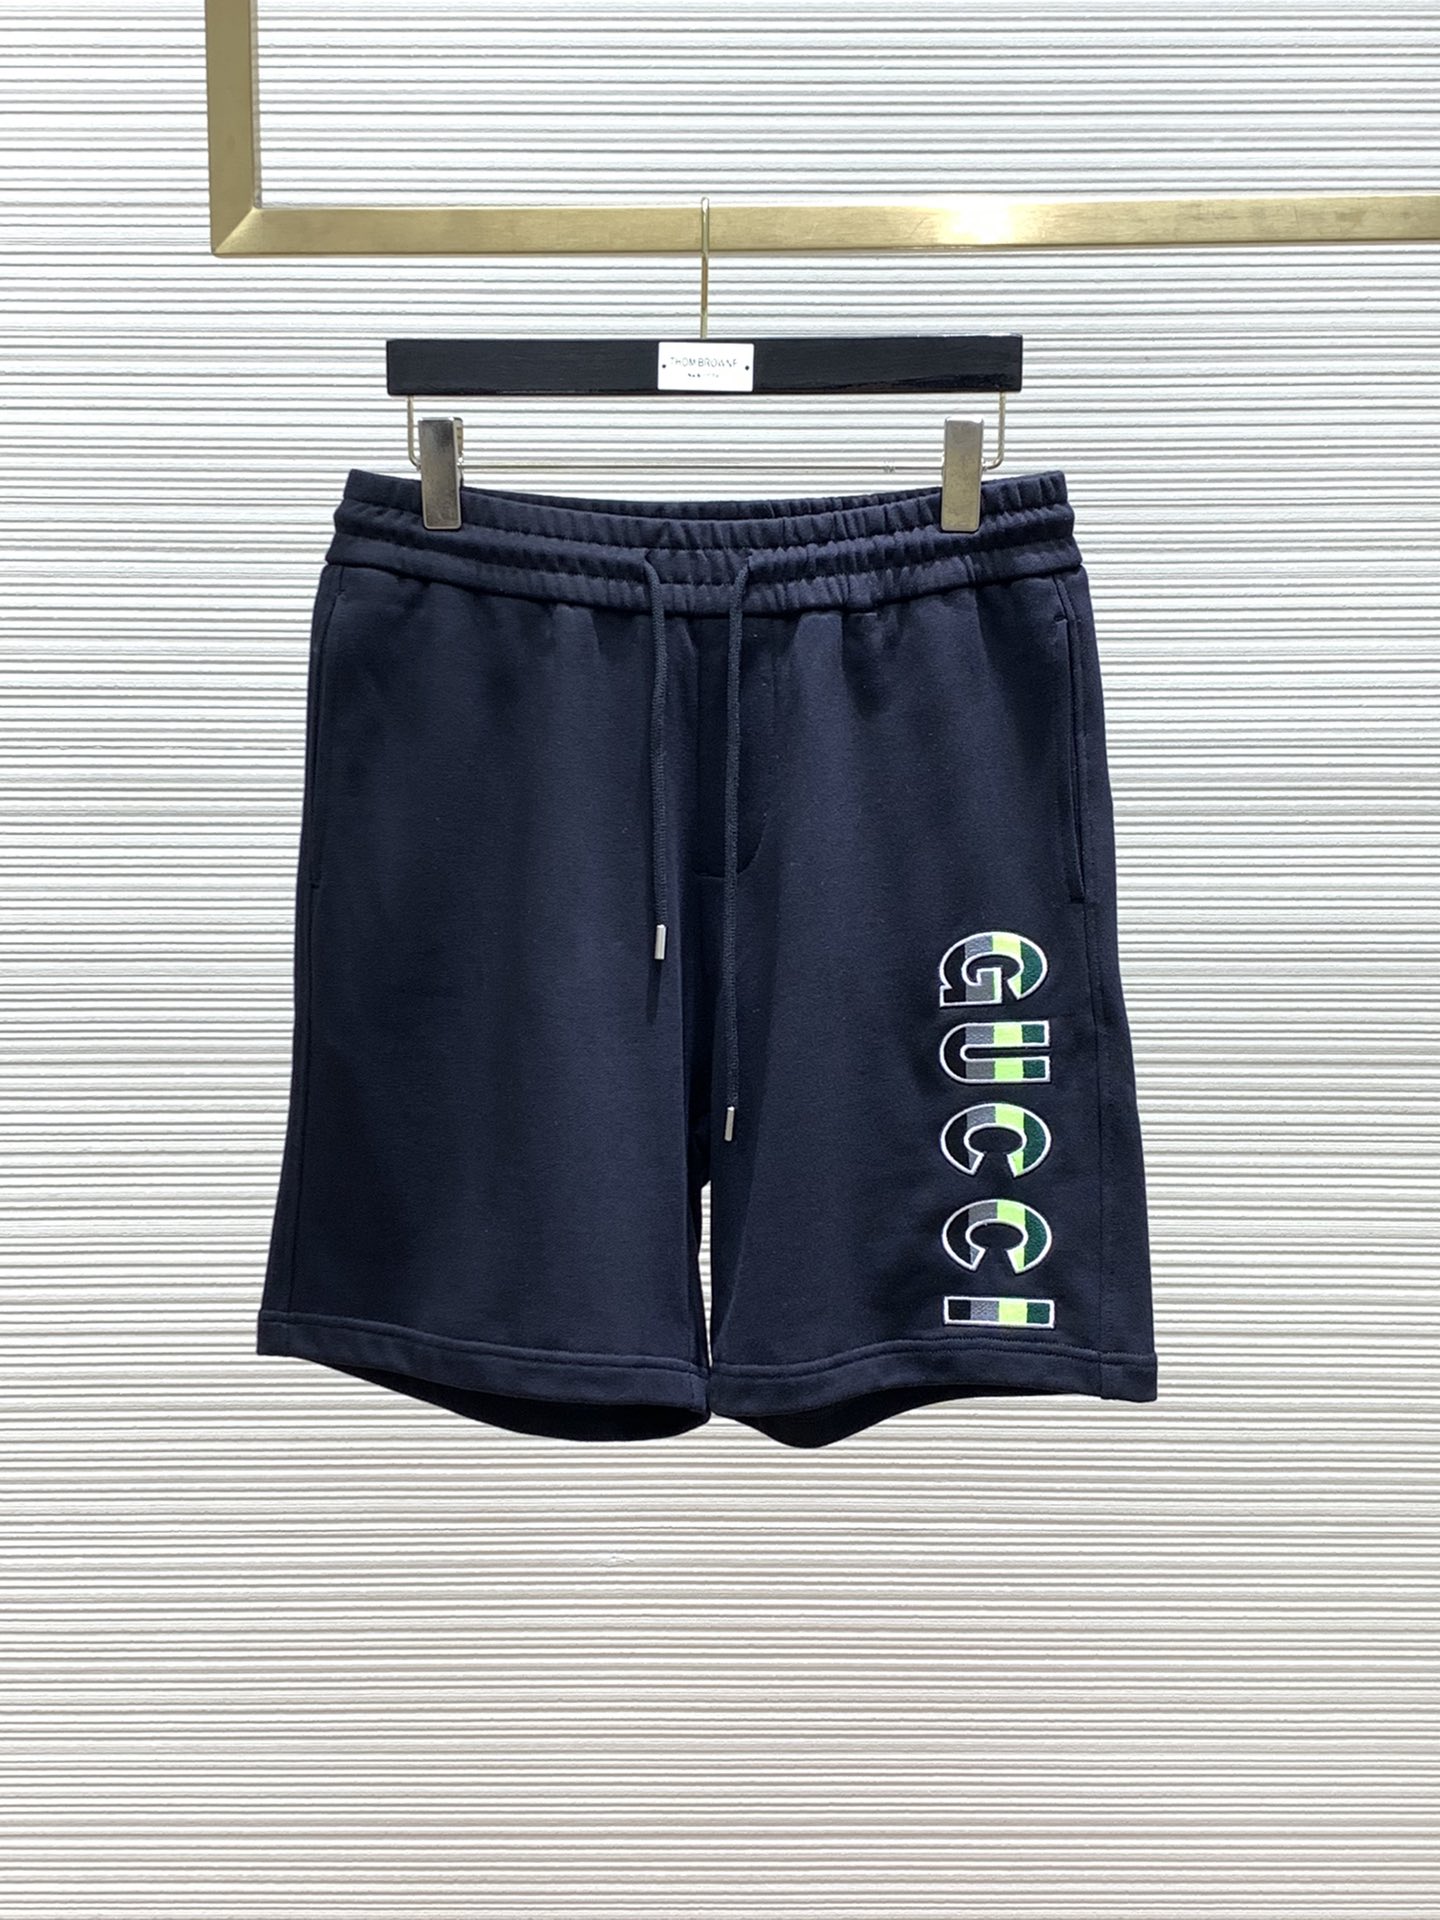 Gucci Clothing Shorts Embroidery Summer Collection Fashion Casual